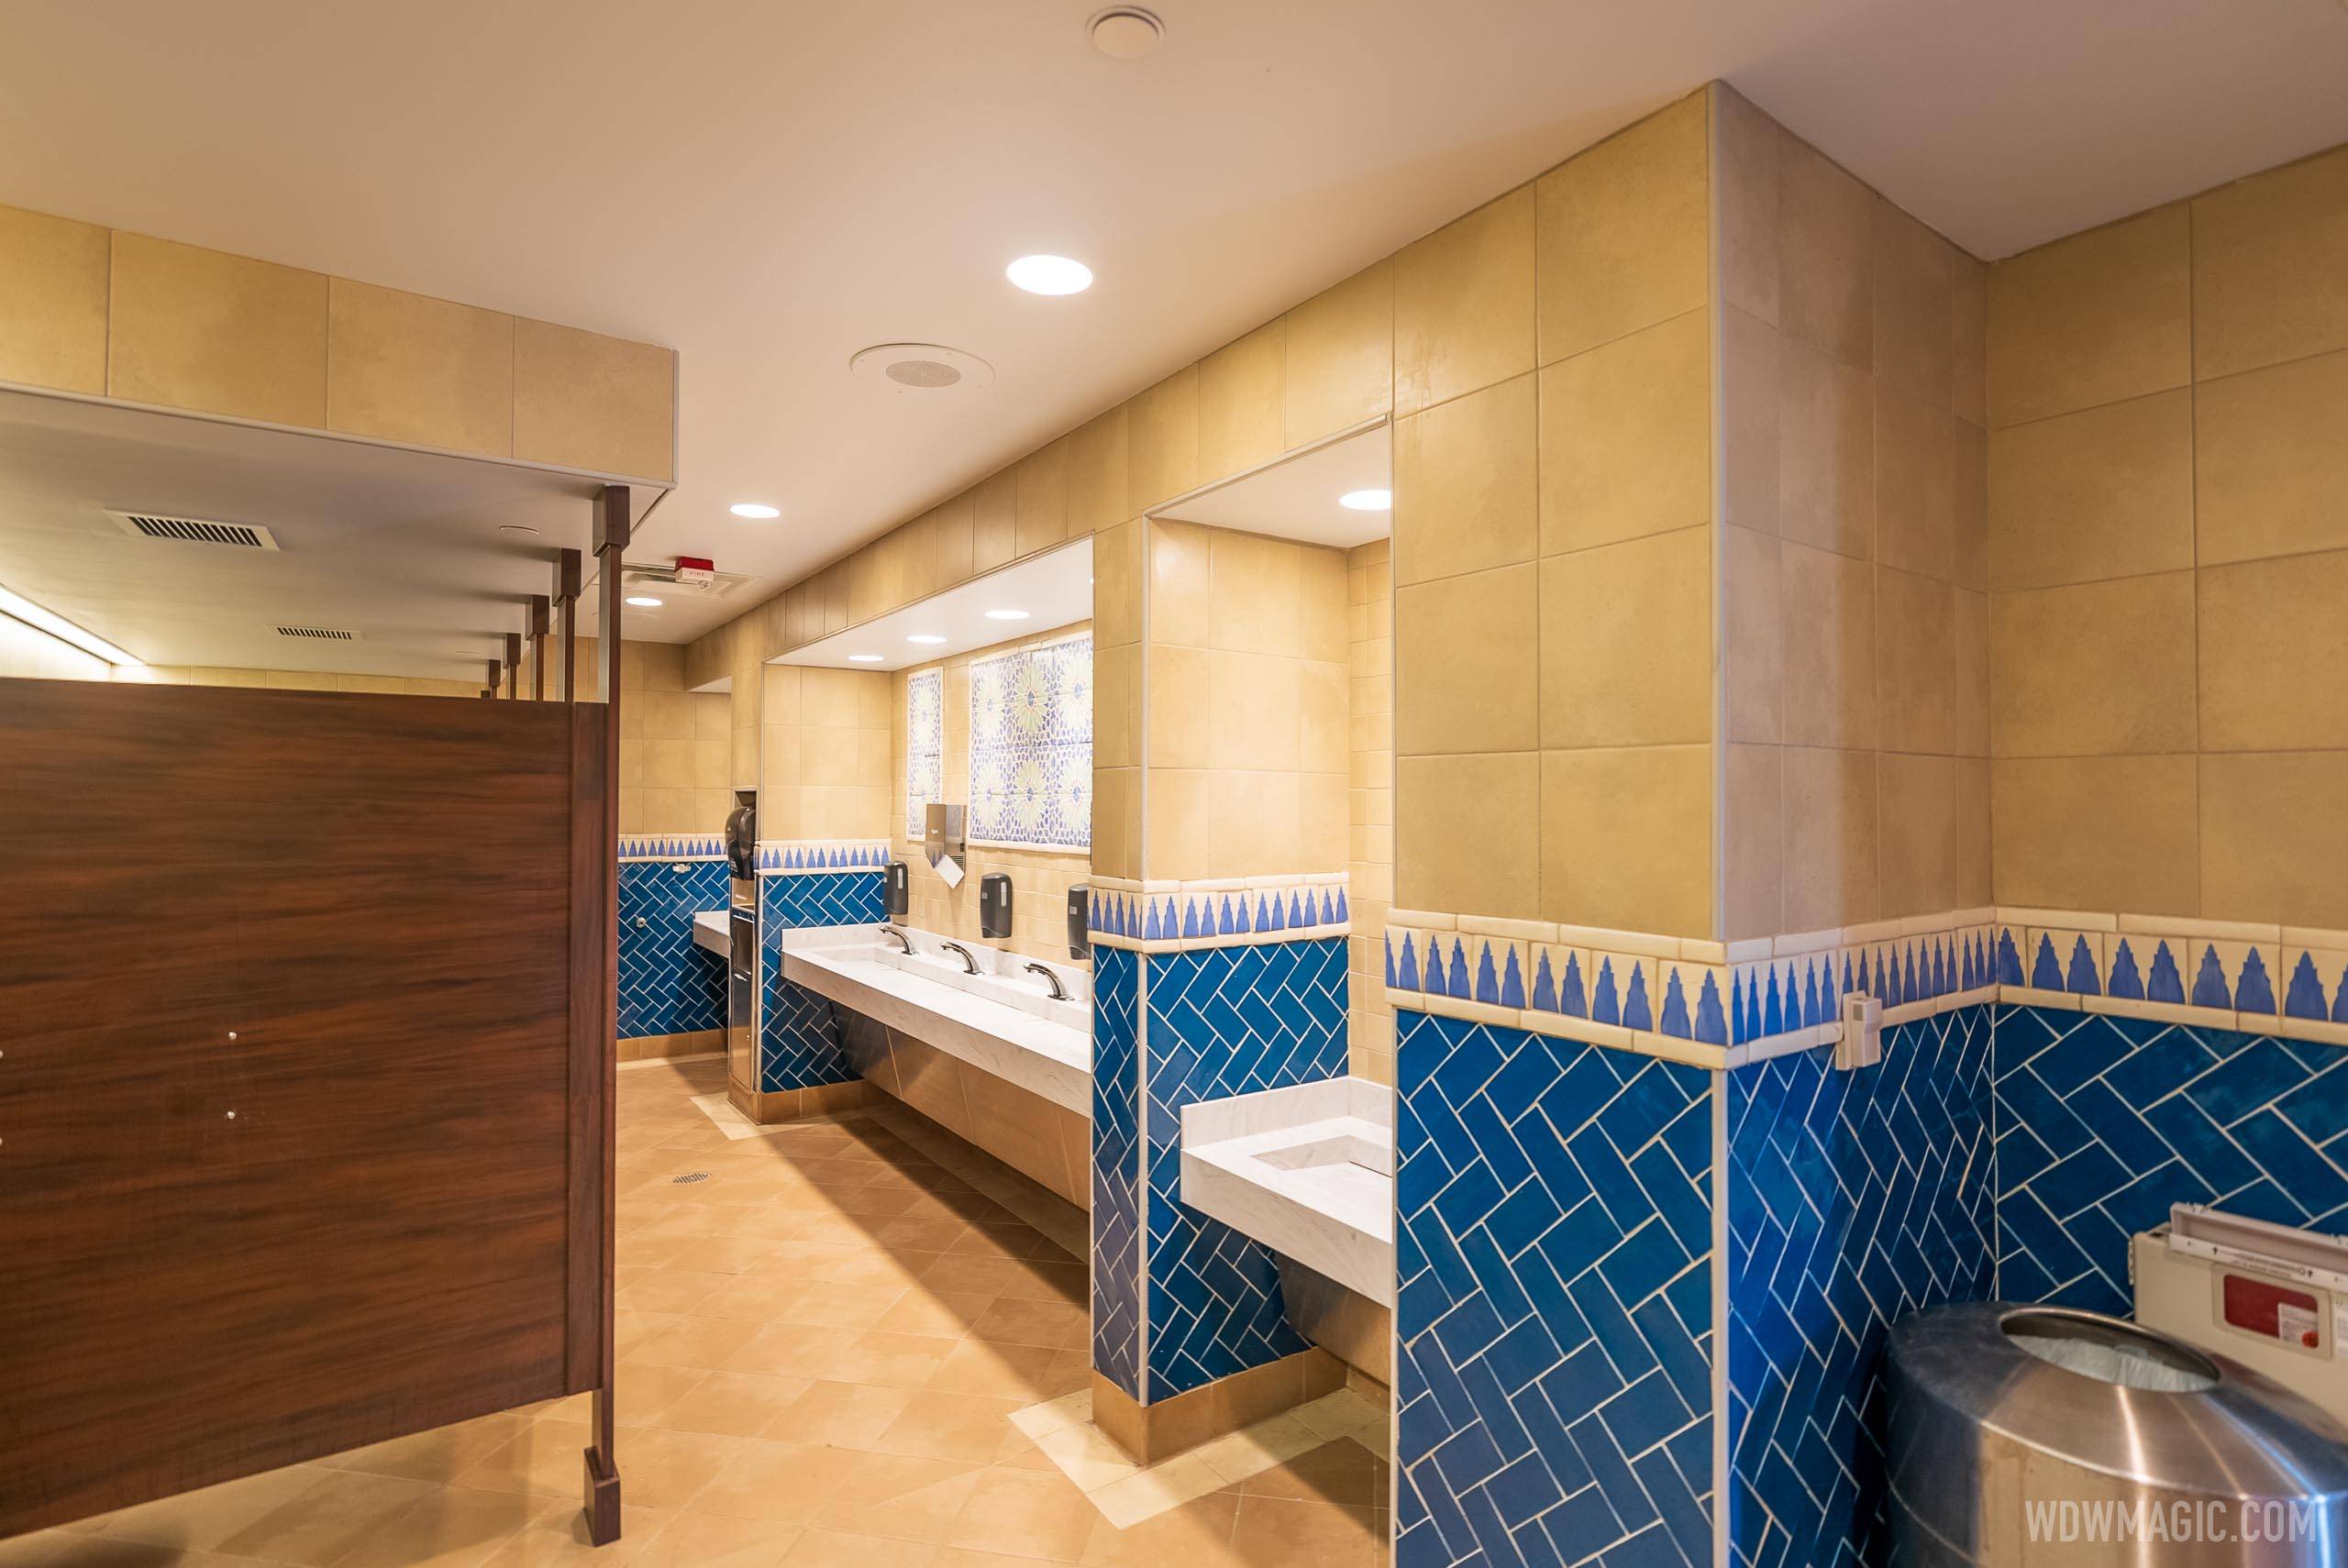 Morocco Pavilion restrooms reopen from refurbishment